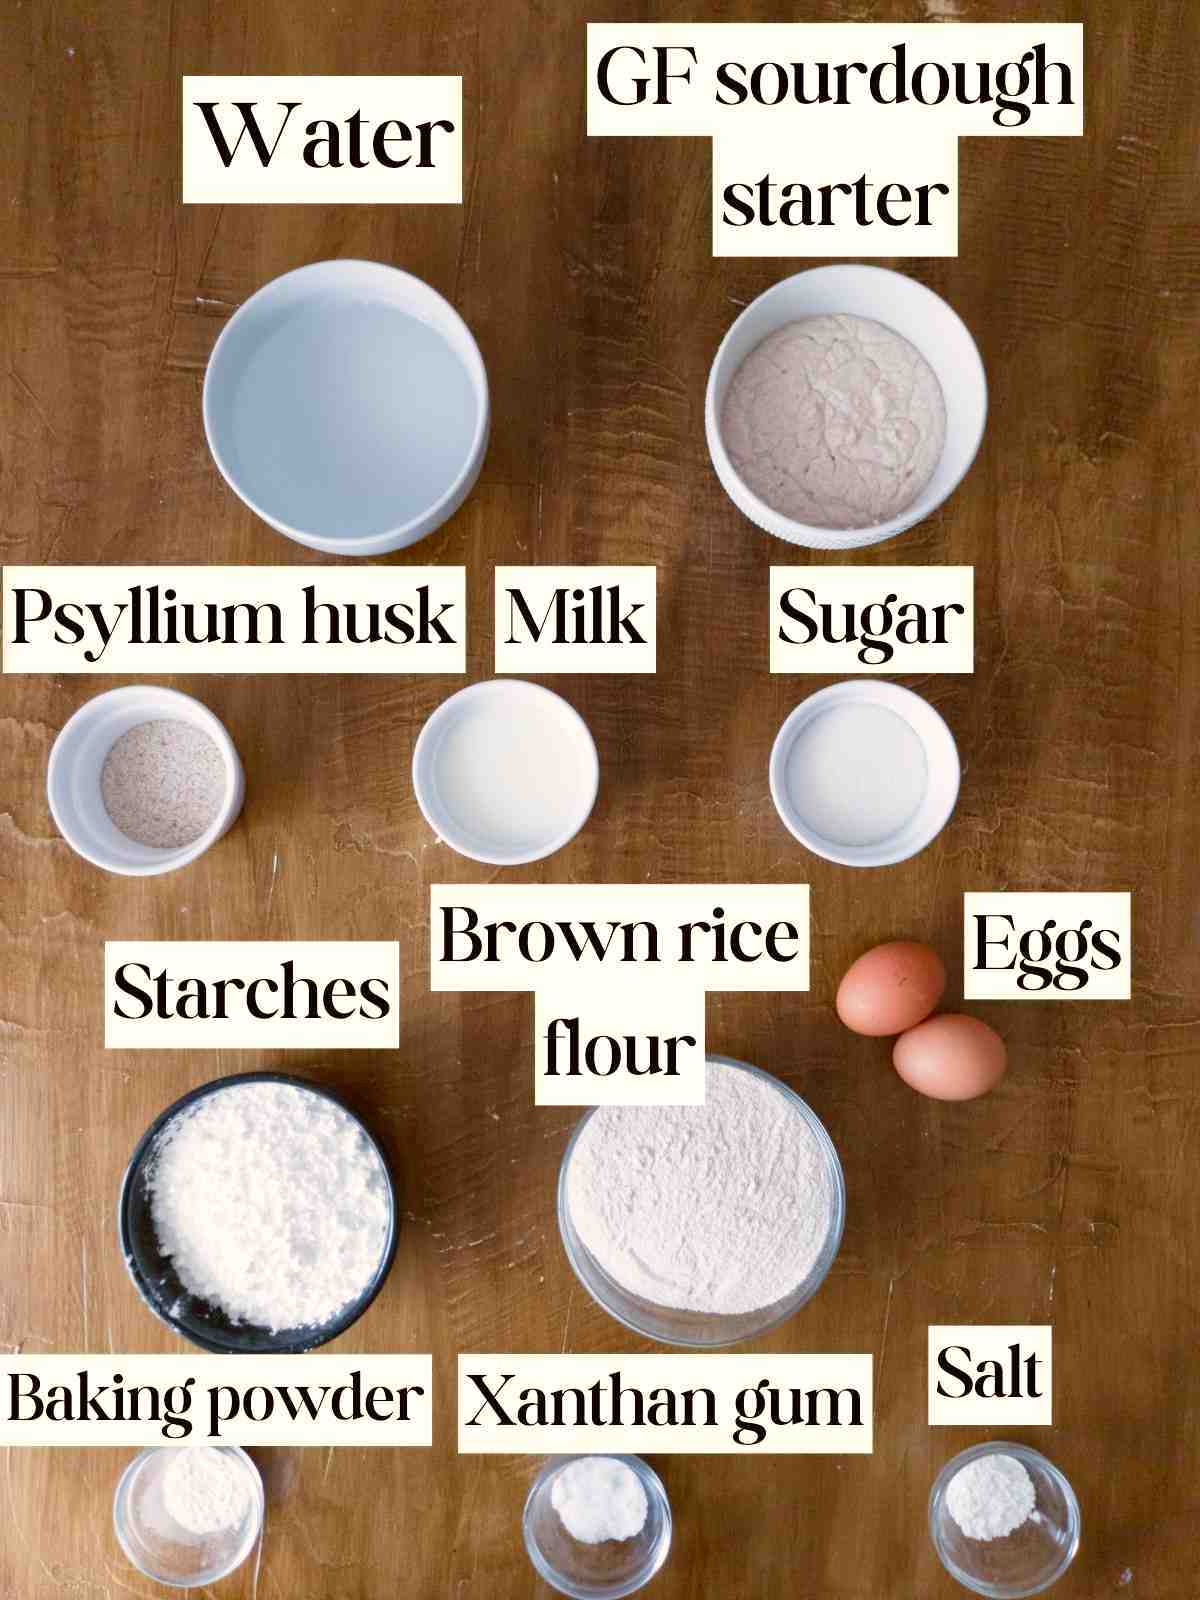 Ingredients on a wooden surface.